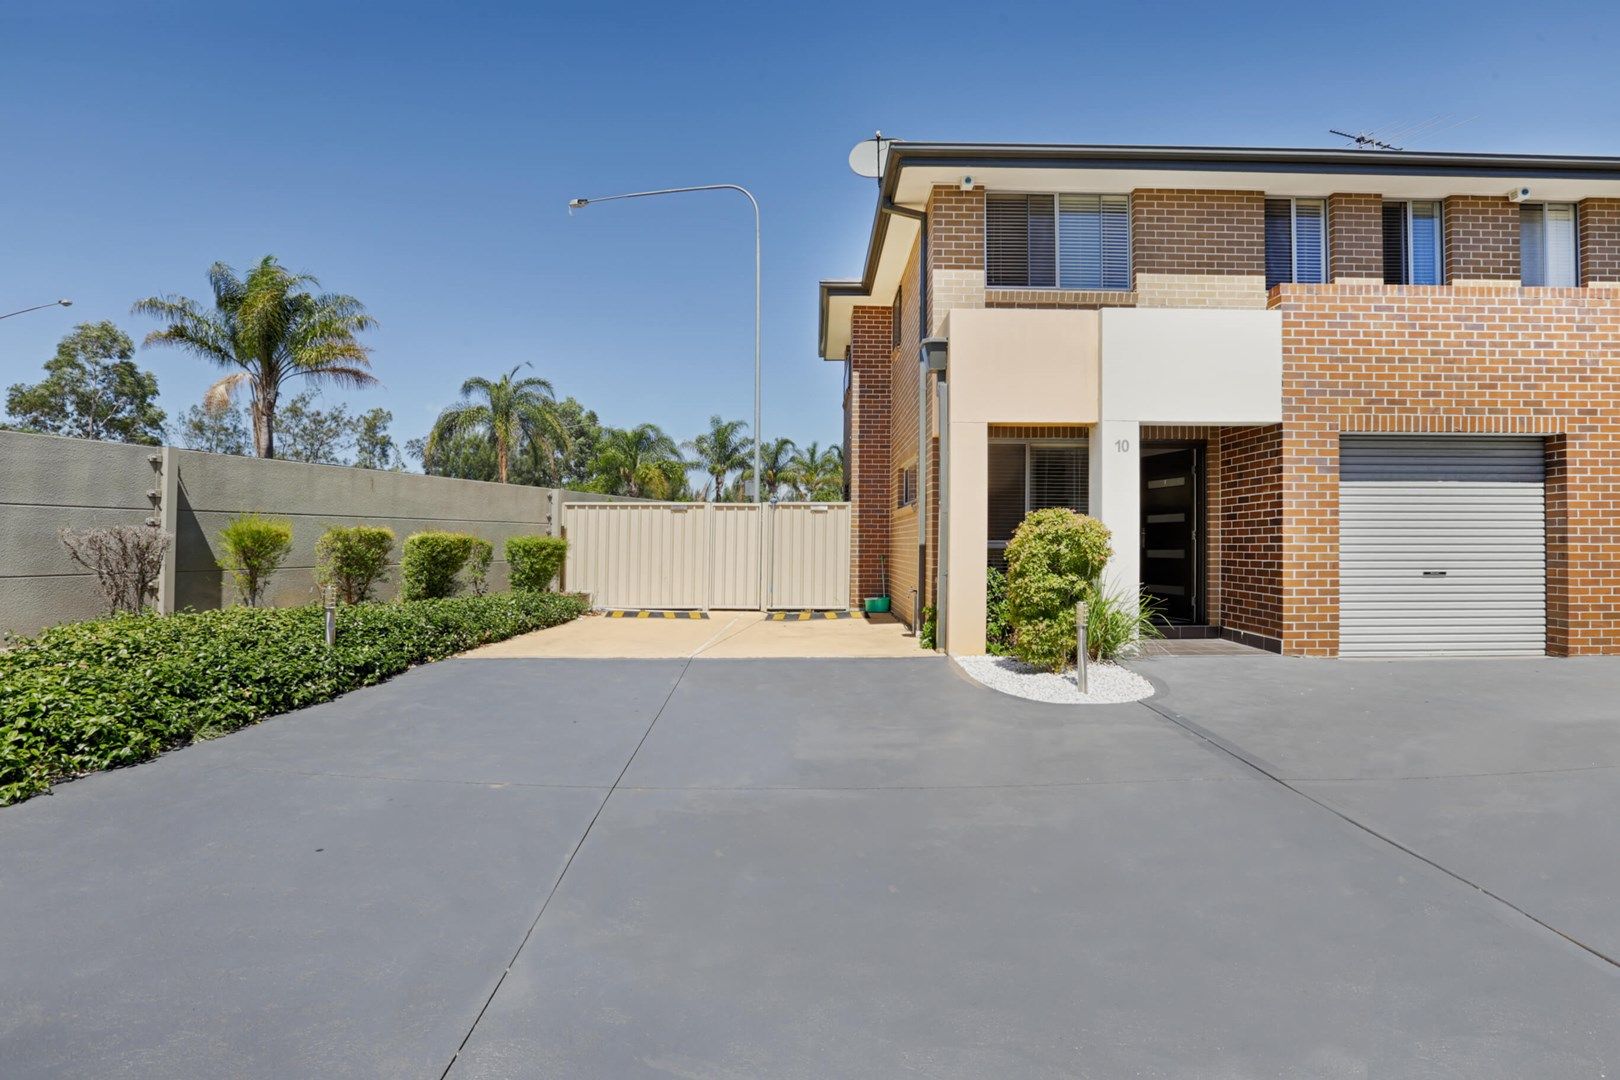 10/570 Sunnyholt Road, Stanhope Gardens NSW 2768, Image 0